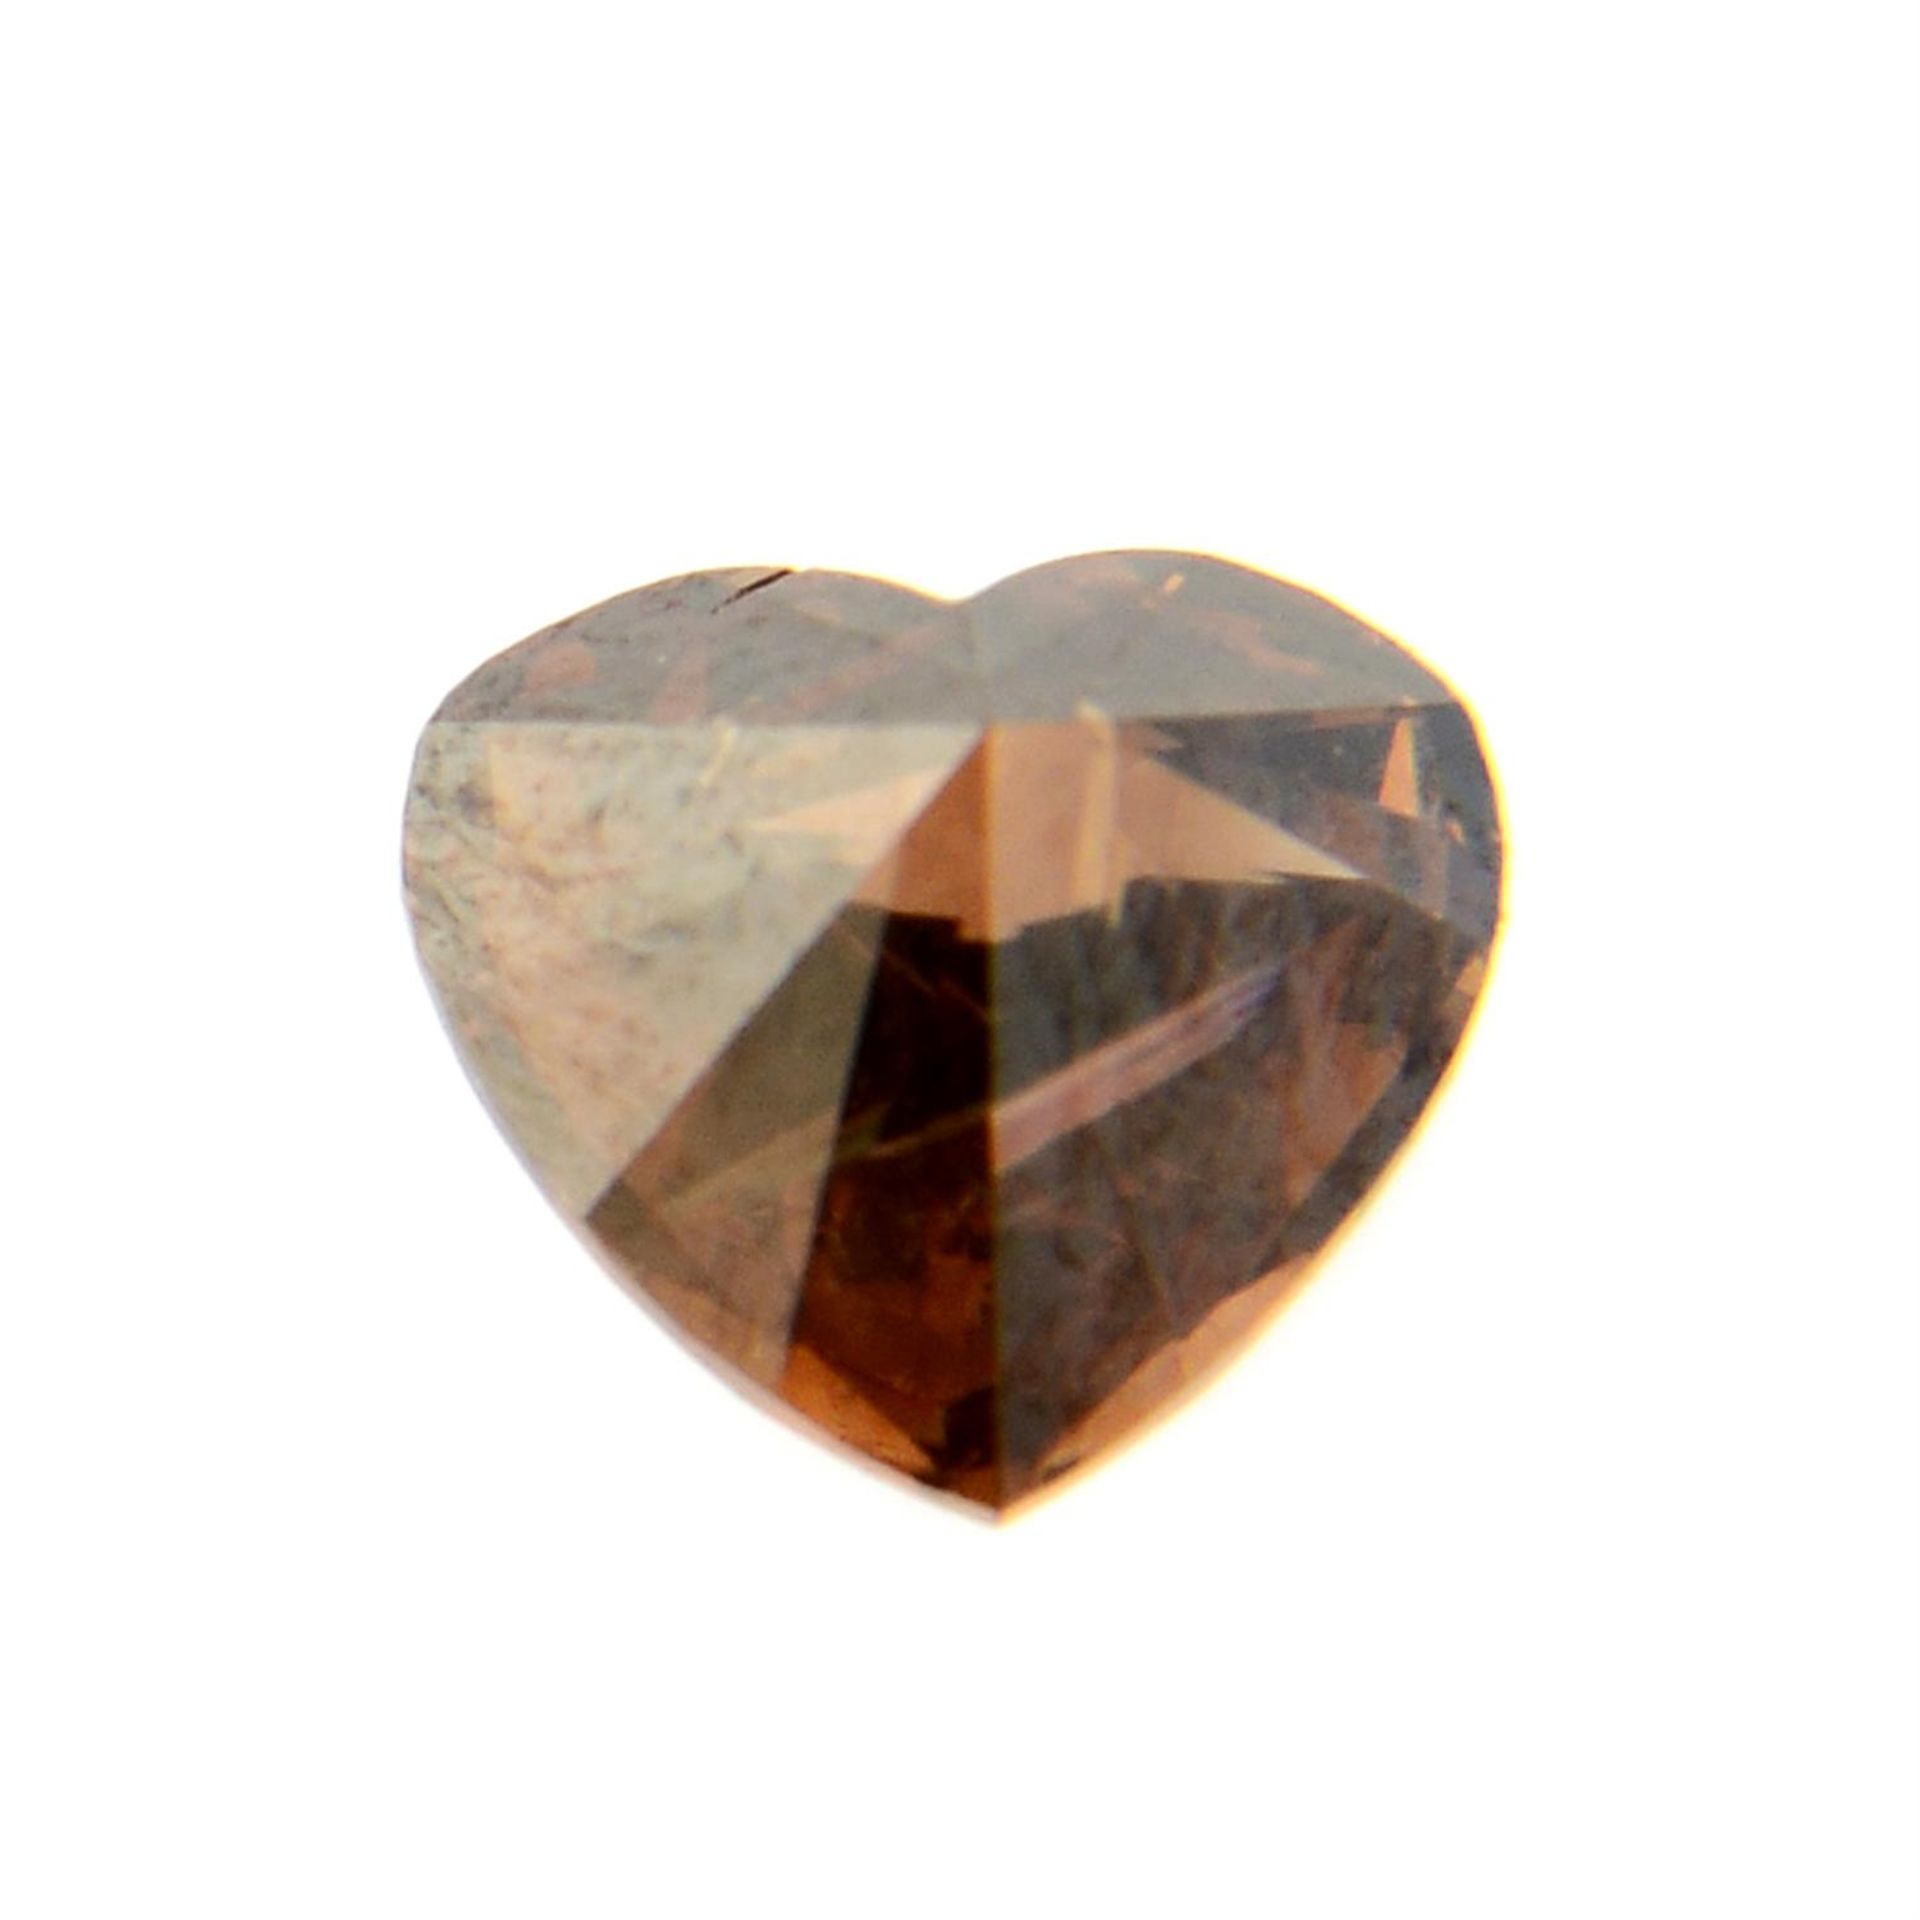 A heart shape 'brown' diamond, weighing 1.02ct. Estimated to be 'brown' colour and I1 clarity - Image 2 of 2